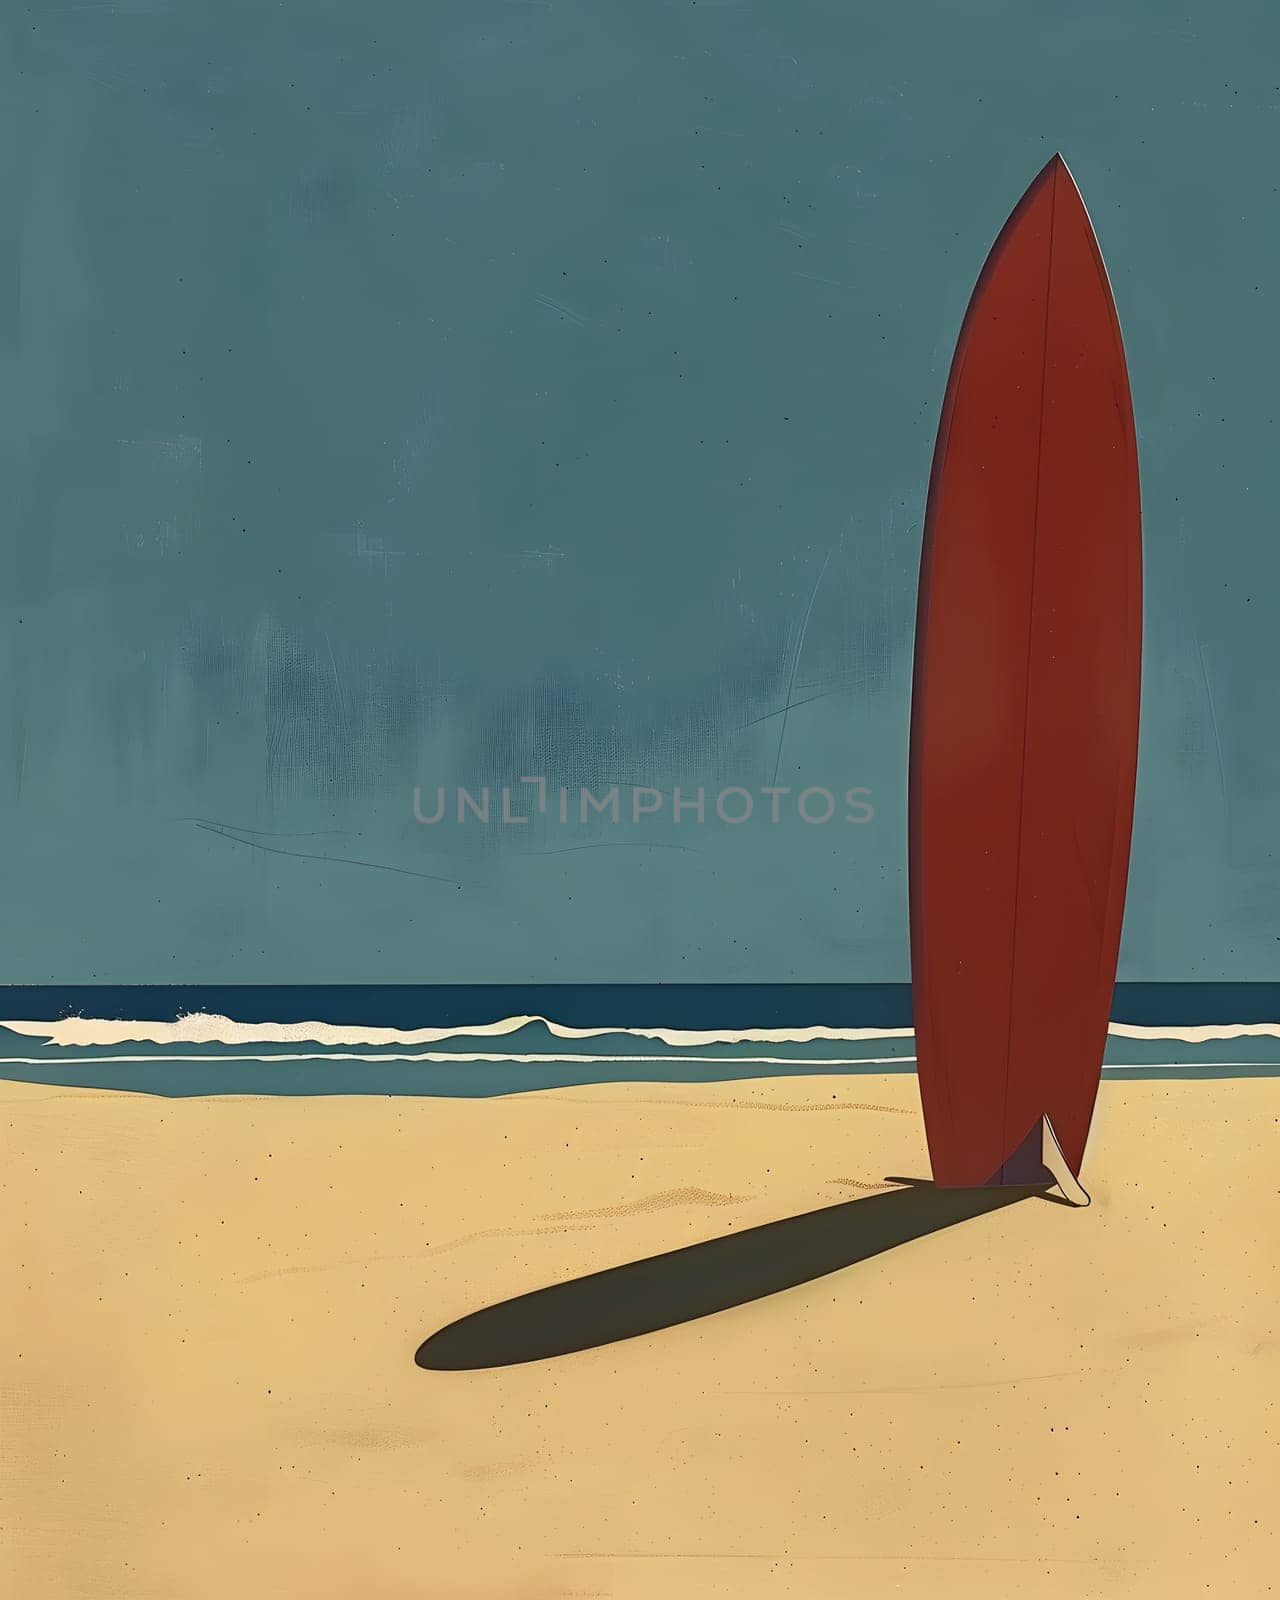 A vibrant red surfboard rests on the golden sandy beach, waiting to hit the waves. The oceans blue waters and the colorful sky create a picturesque backdrop for this essential surfing equipment